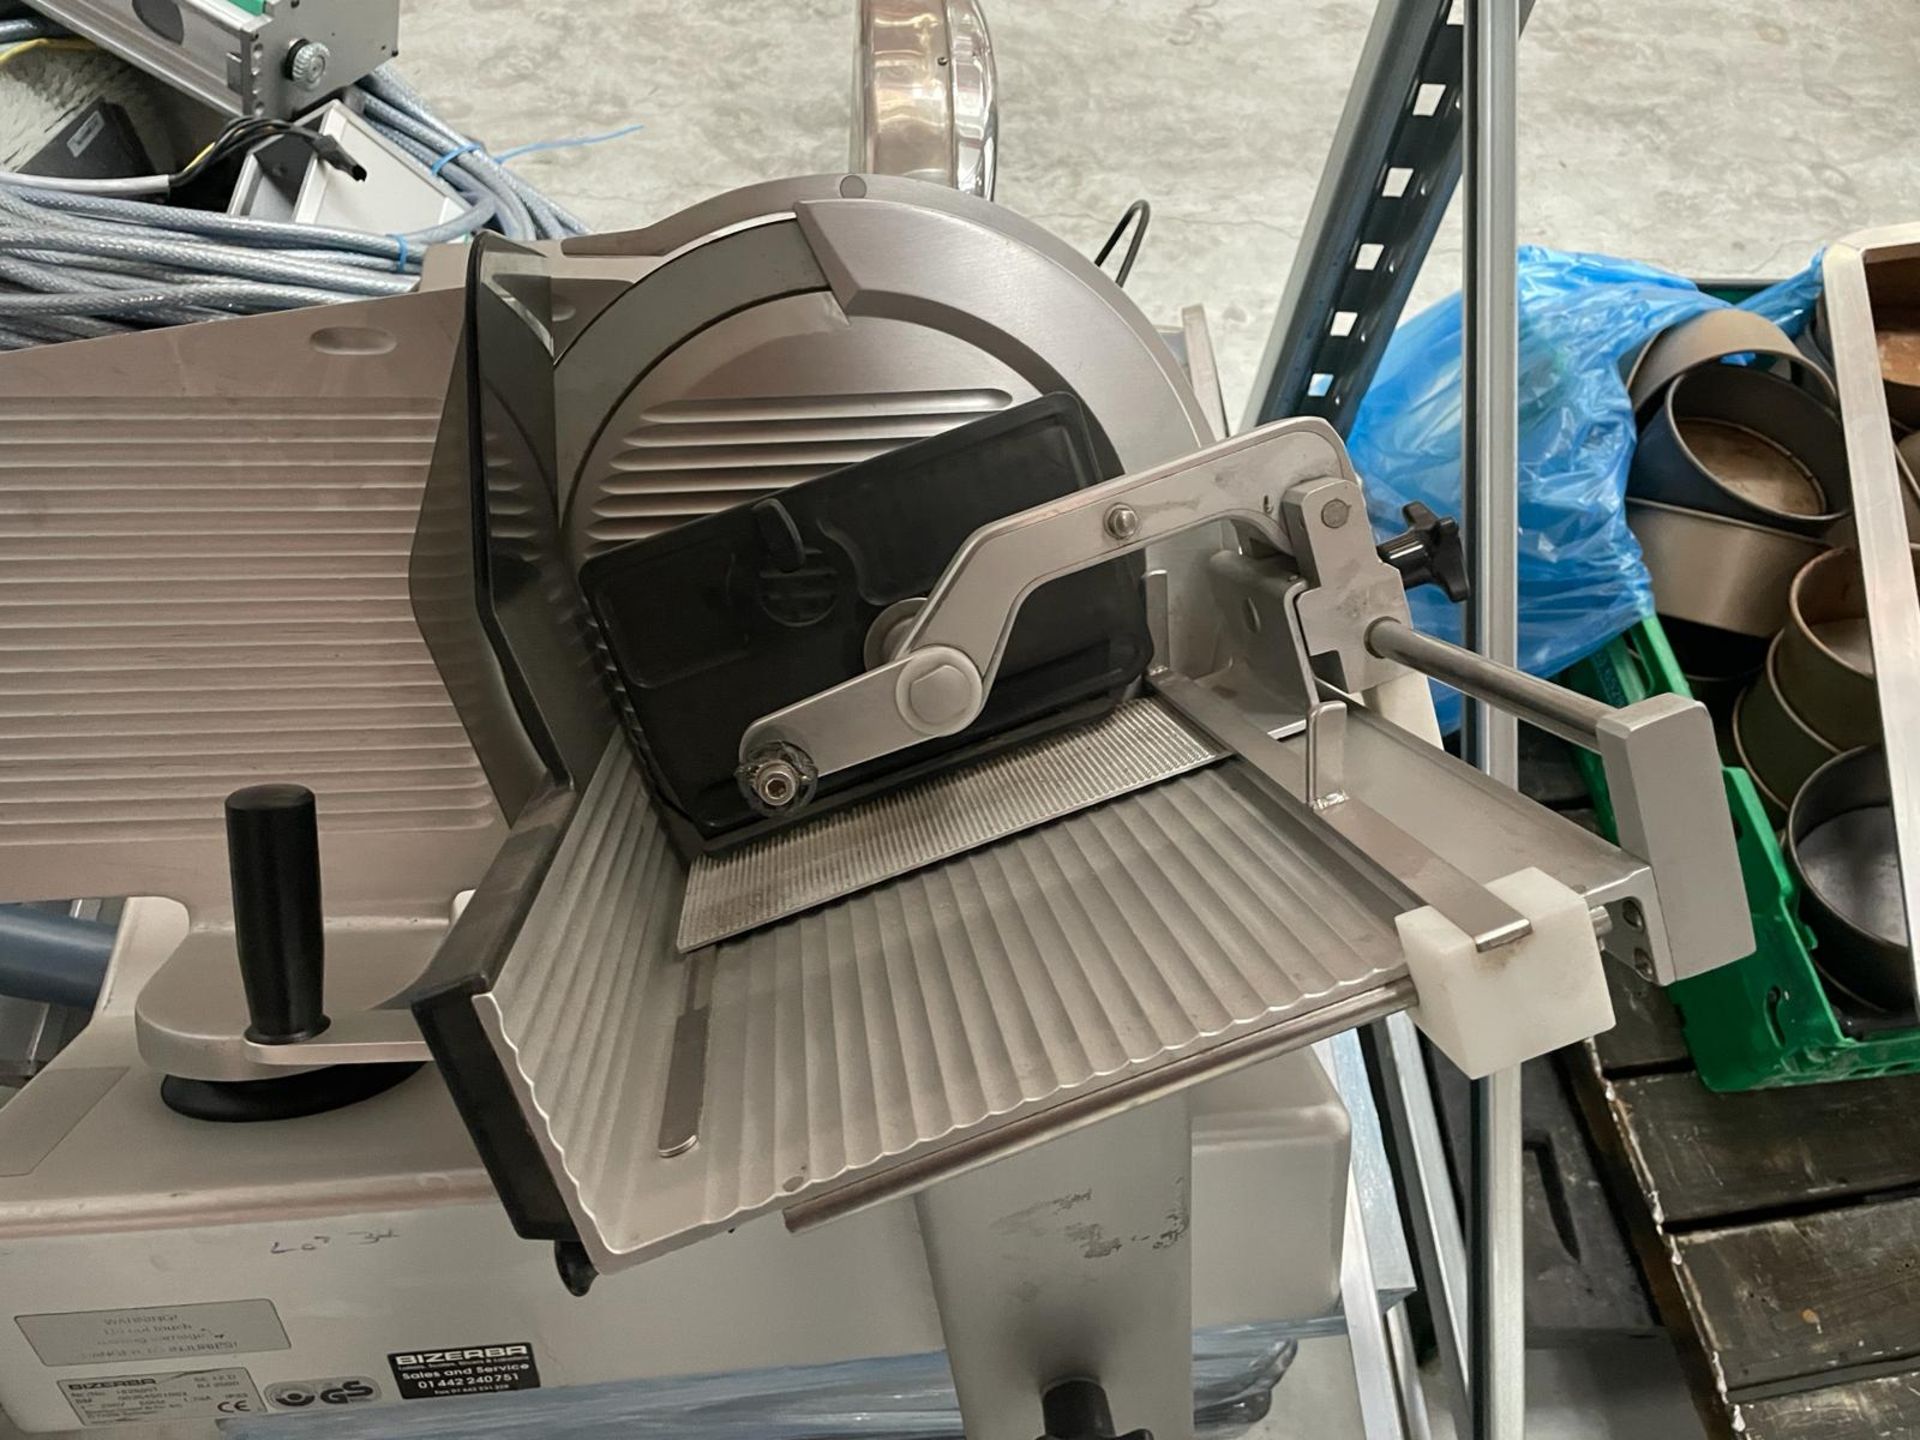 Bizerba SE 12D Meat slicer. Please note this lot is located at Unit 29, Ridge Way, Iver, Bucks, - Image 4 of 11